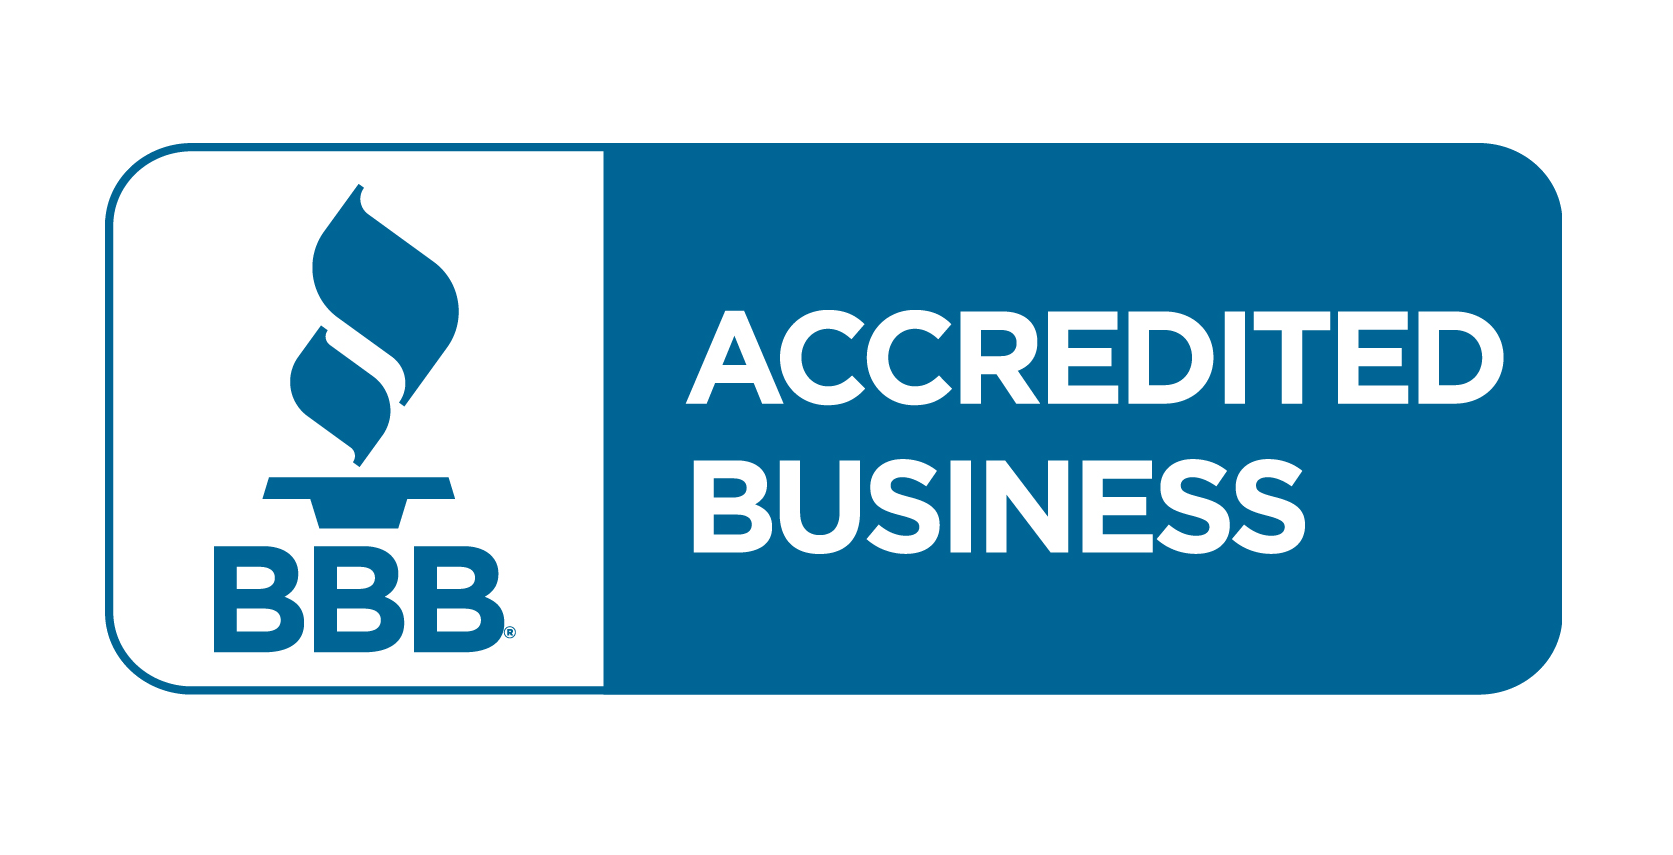 BBB acccredited business logo